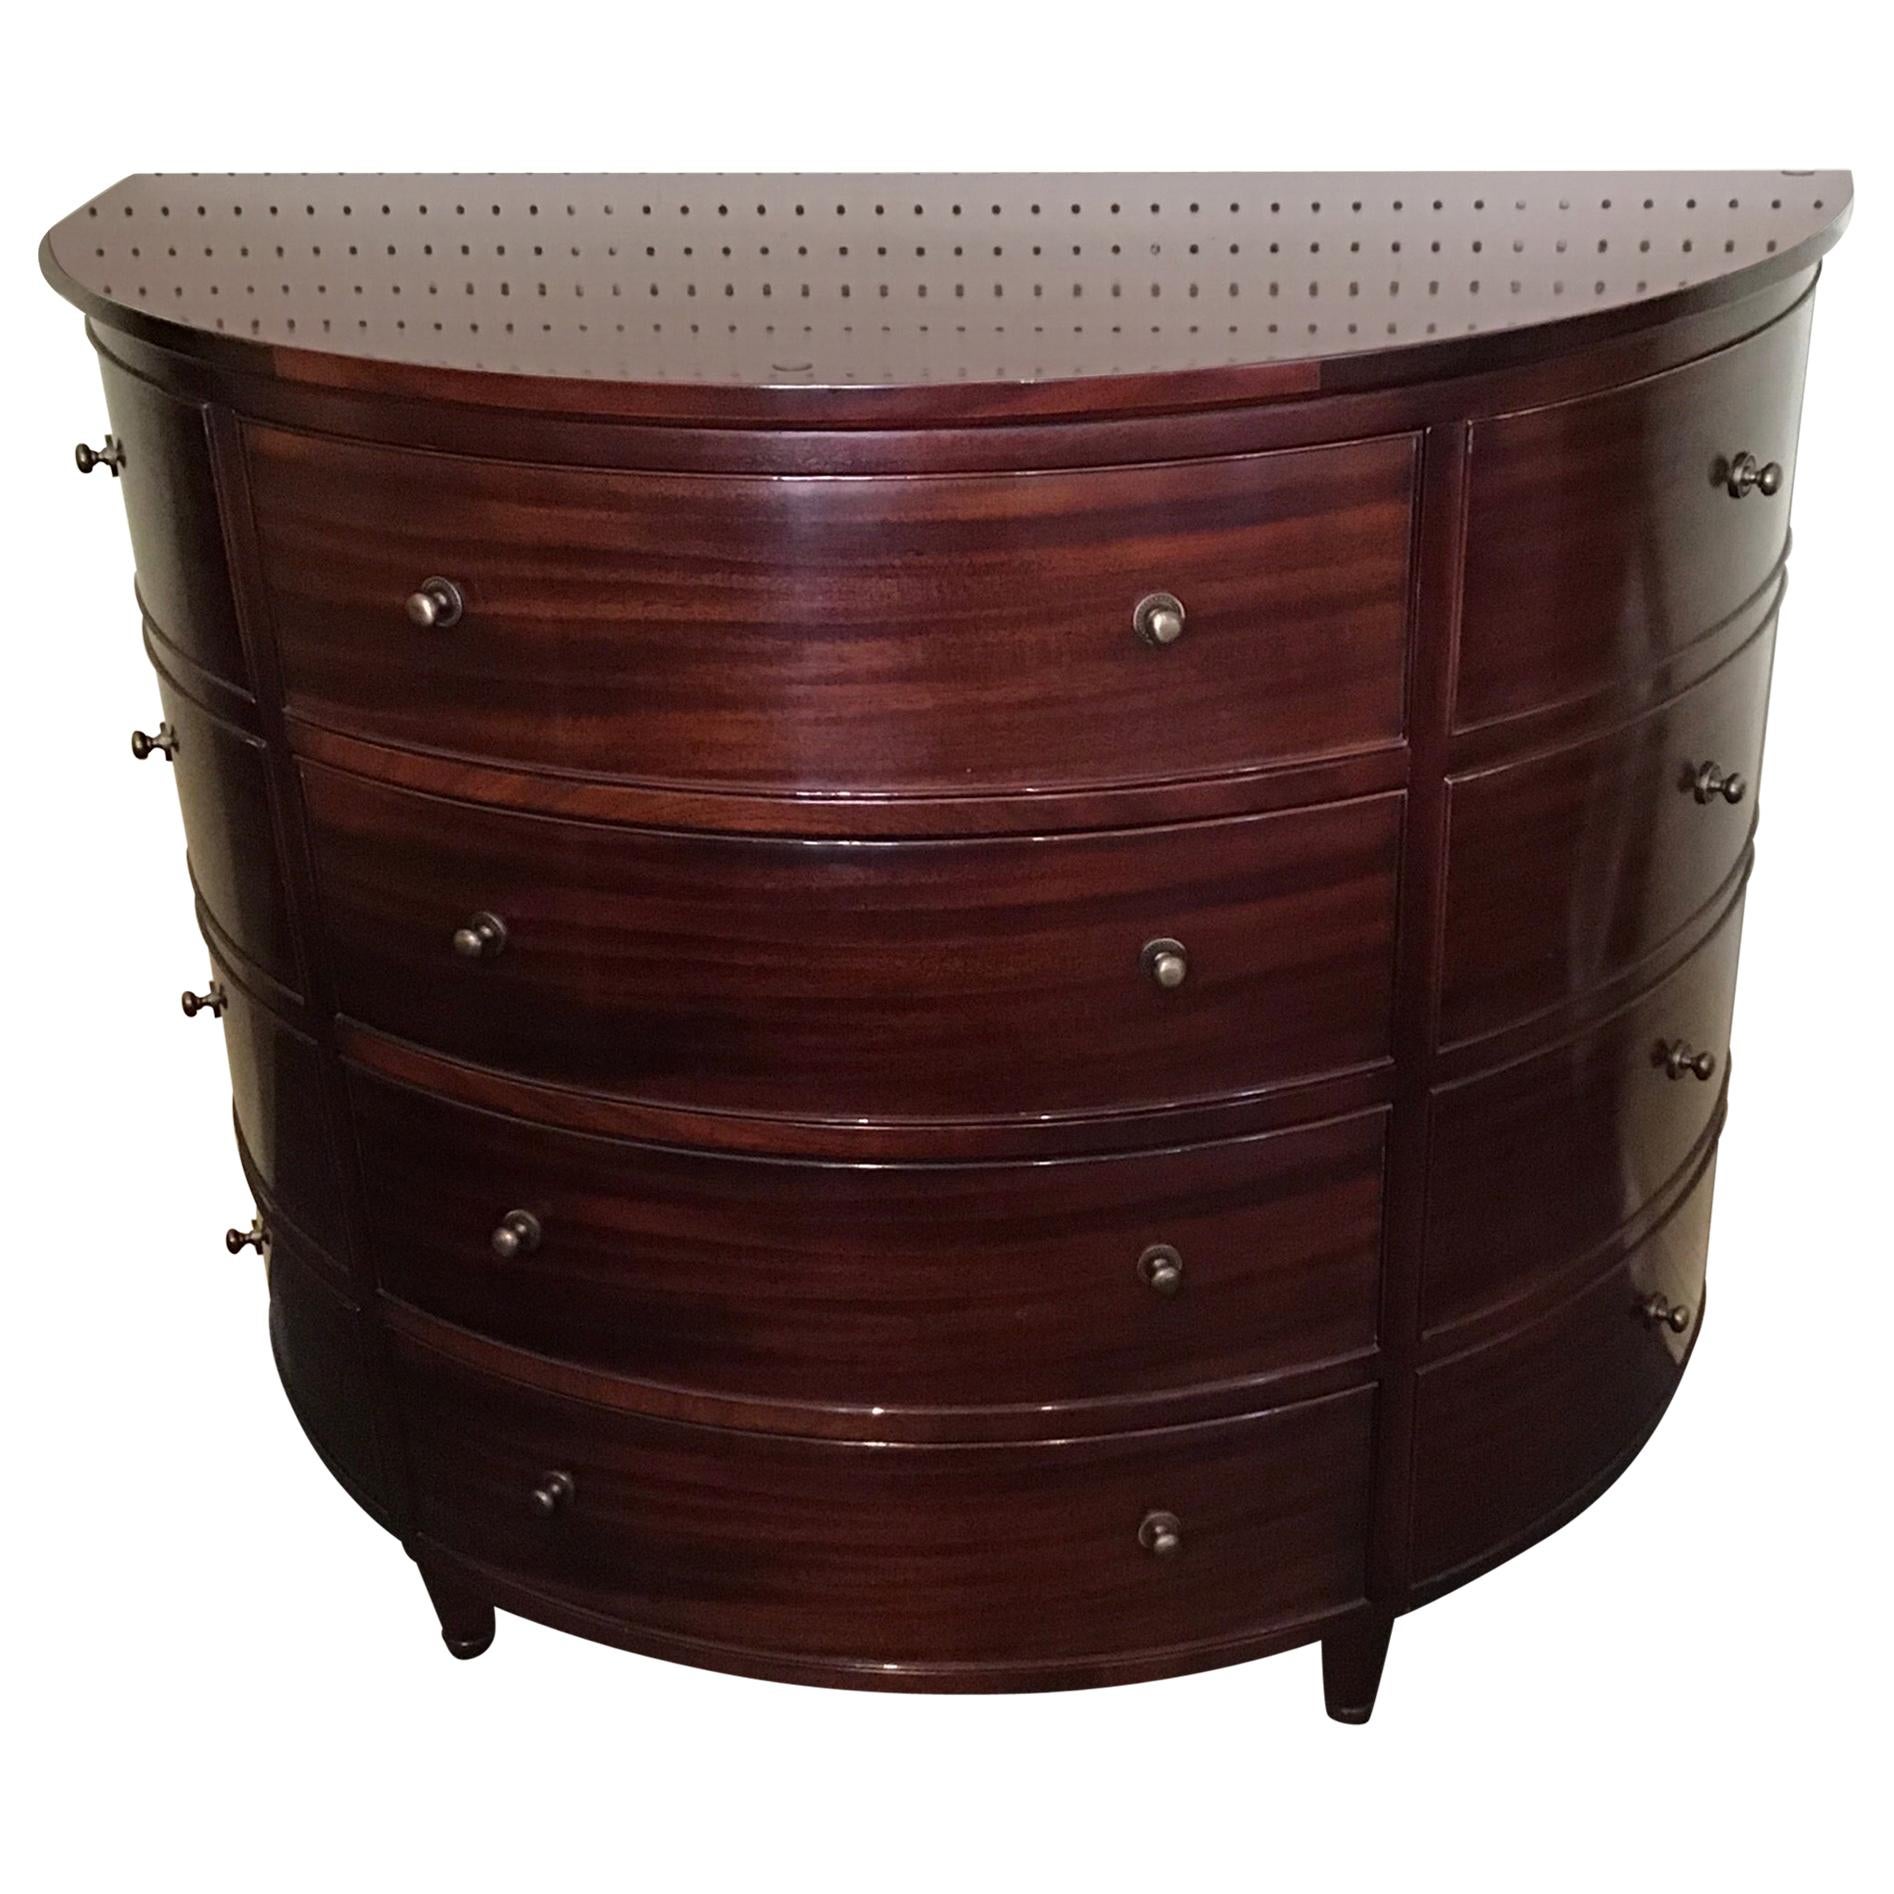 "Jefferson" Demilune Commode Chest by Thomas Pheasant for Baker